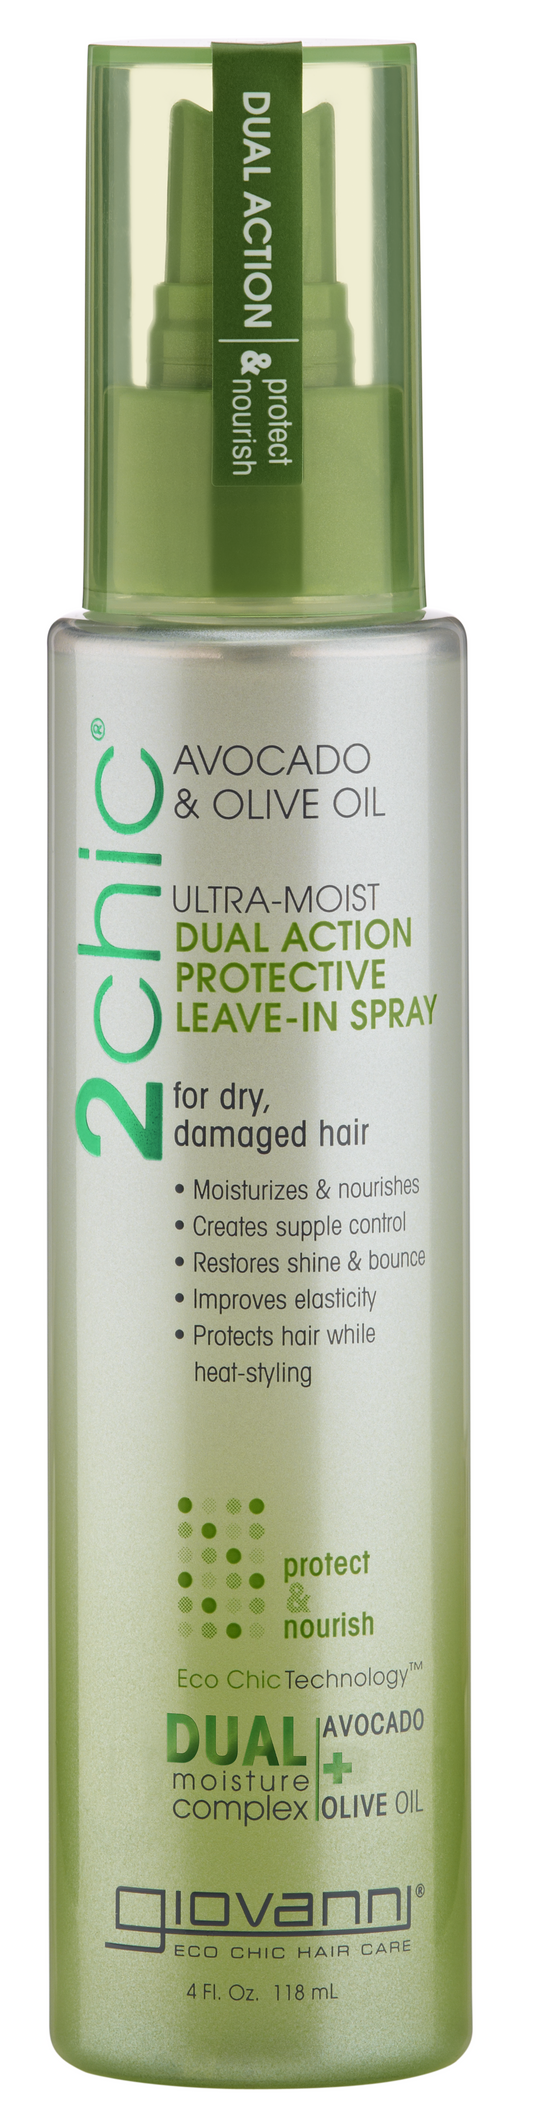 Giovanni 2chic Ultra Moist Dual Action Leave In Protection Spray - 118ml